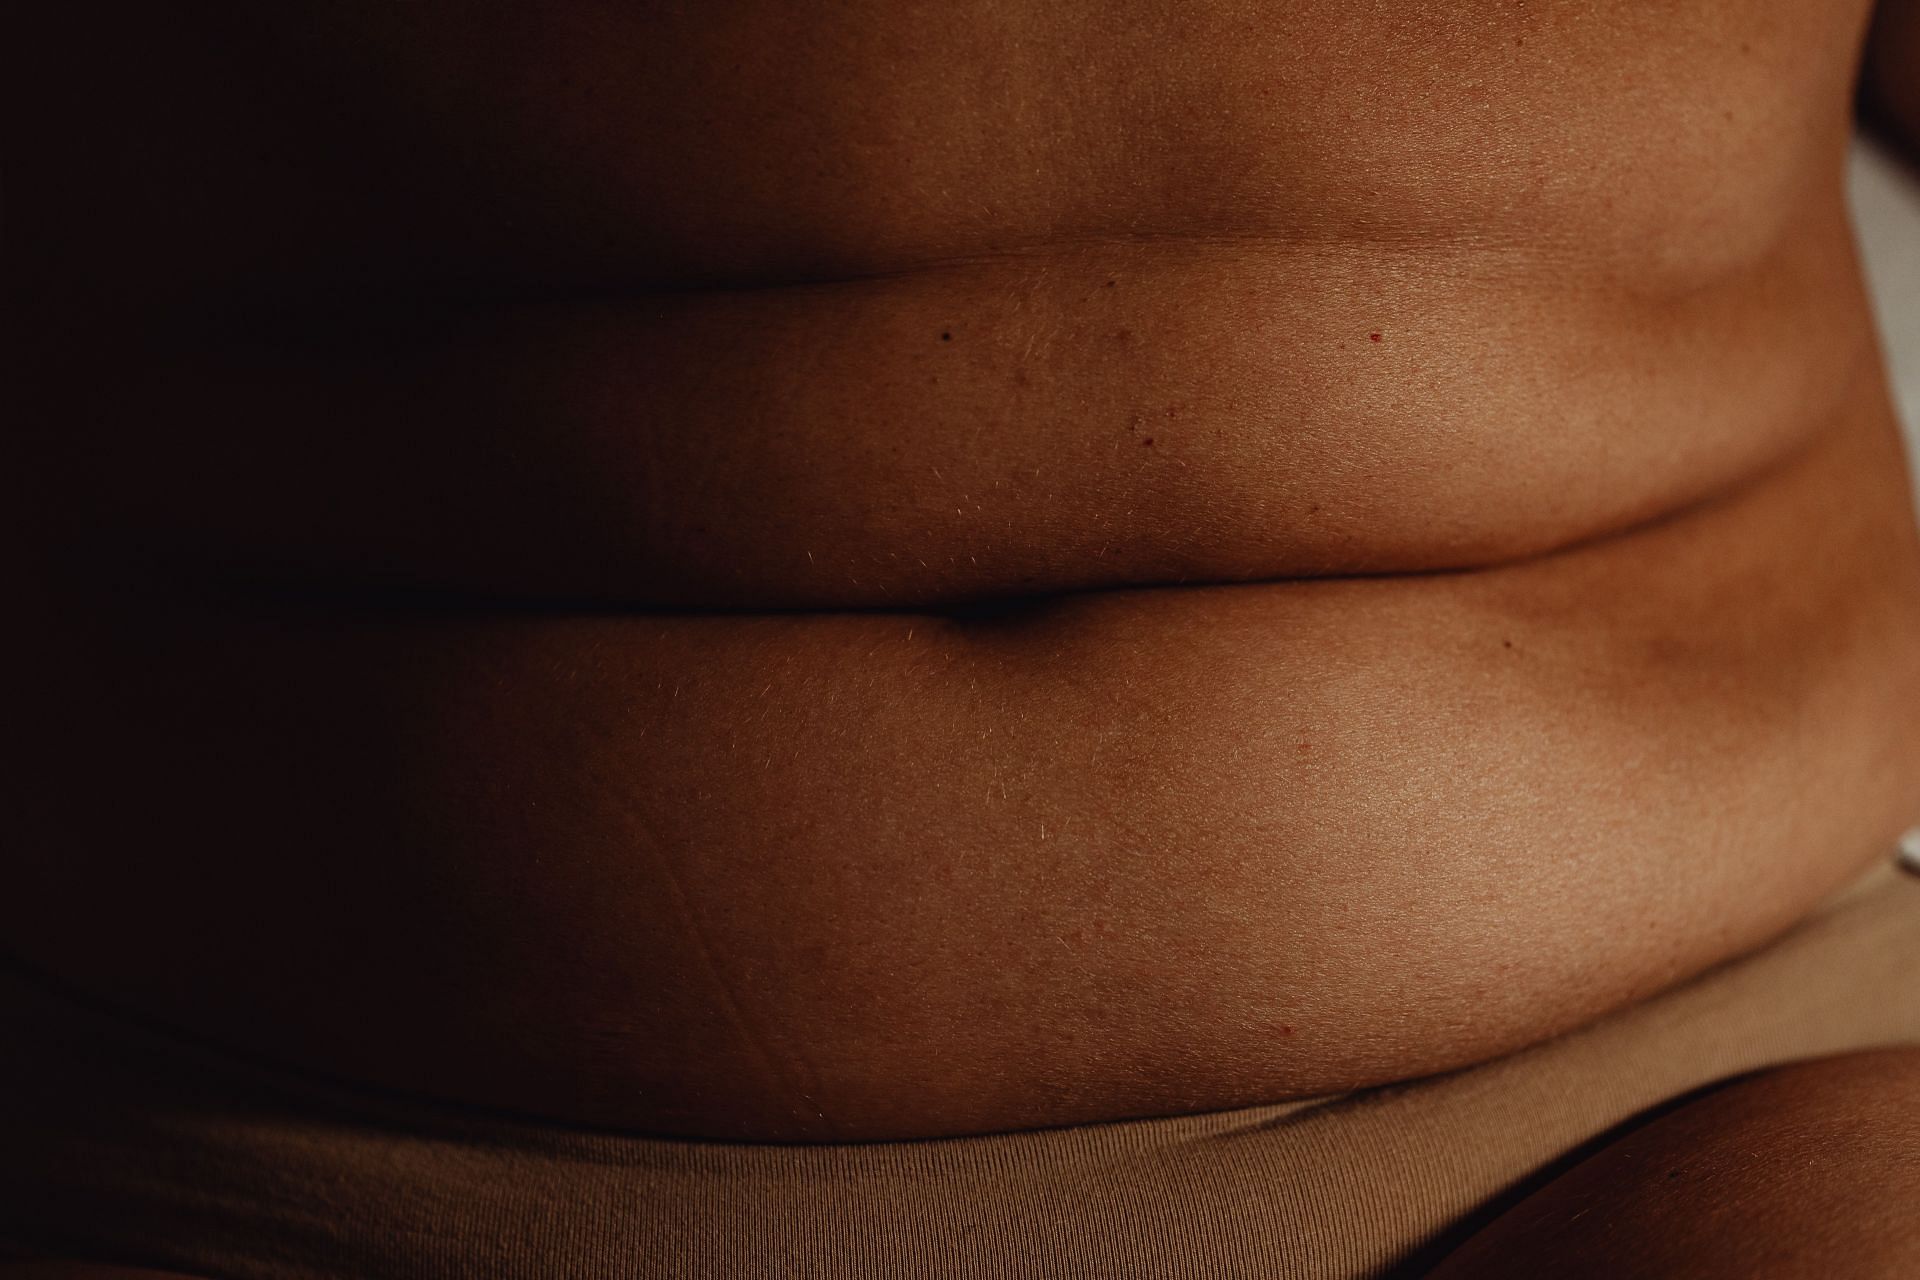 Strength training exercises combined with diet can help reduce belly overhang. (Image via Pexels /Karolina Garabowska)